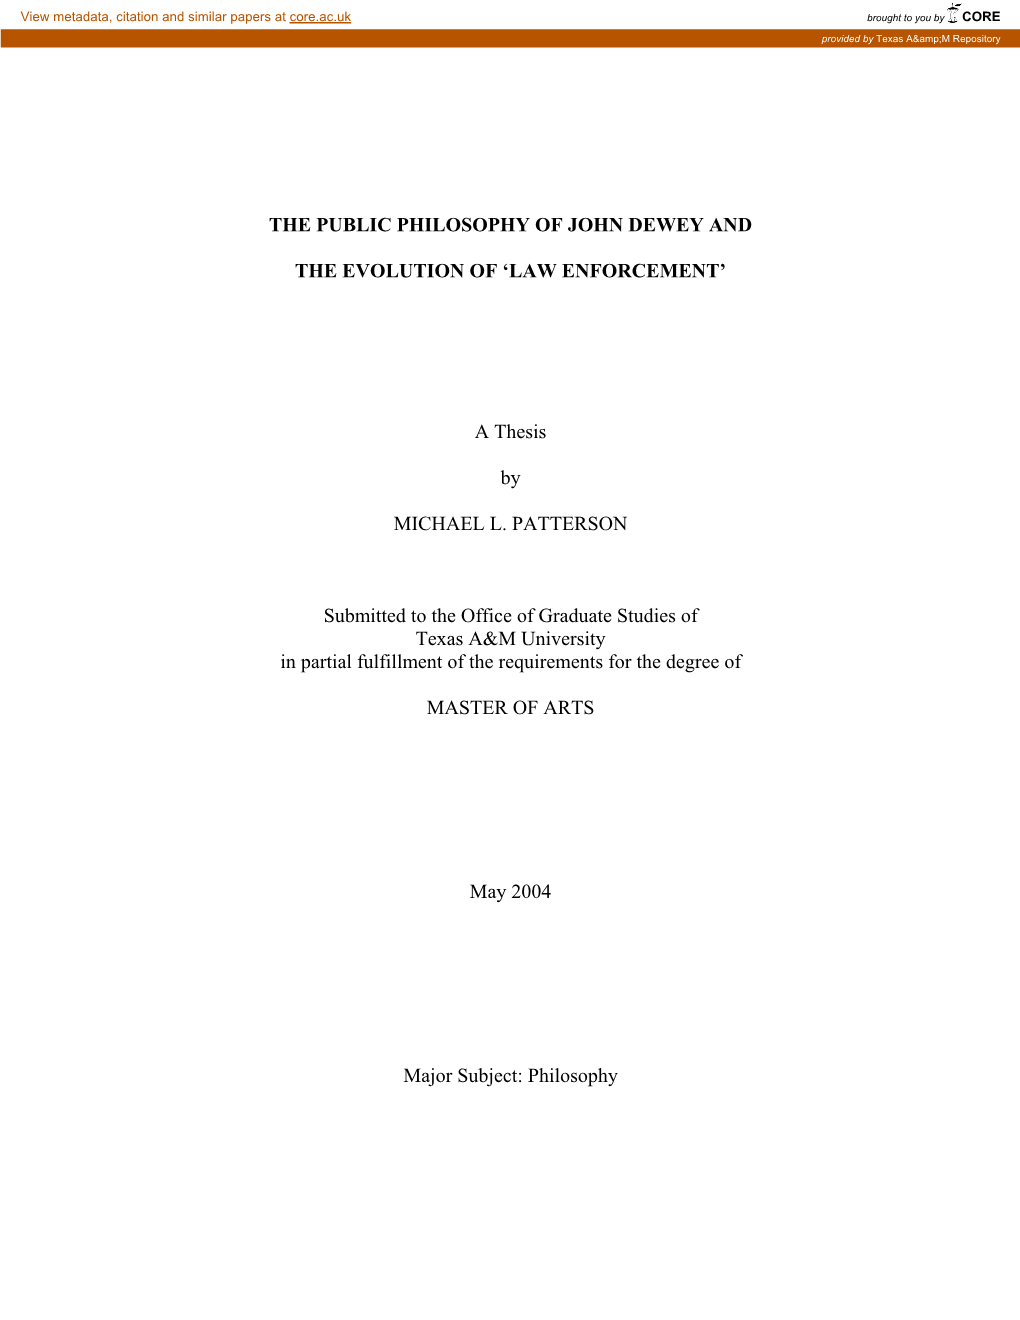 The Public Philosophy of John Dewey and the Evolution Of